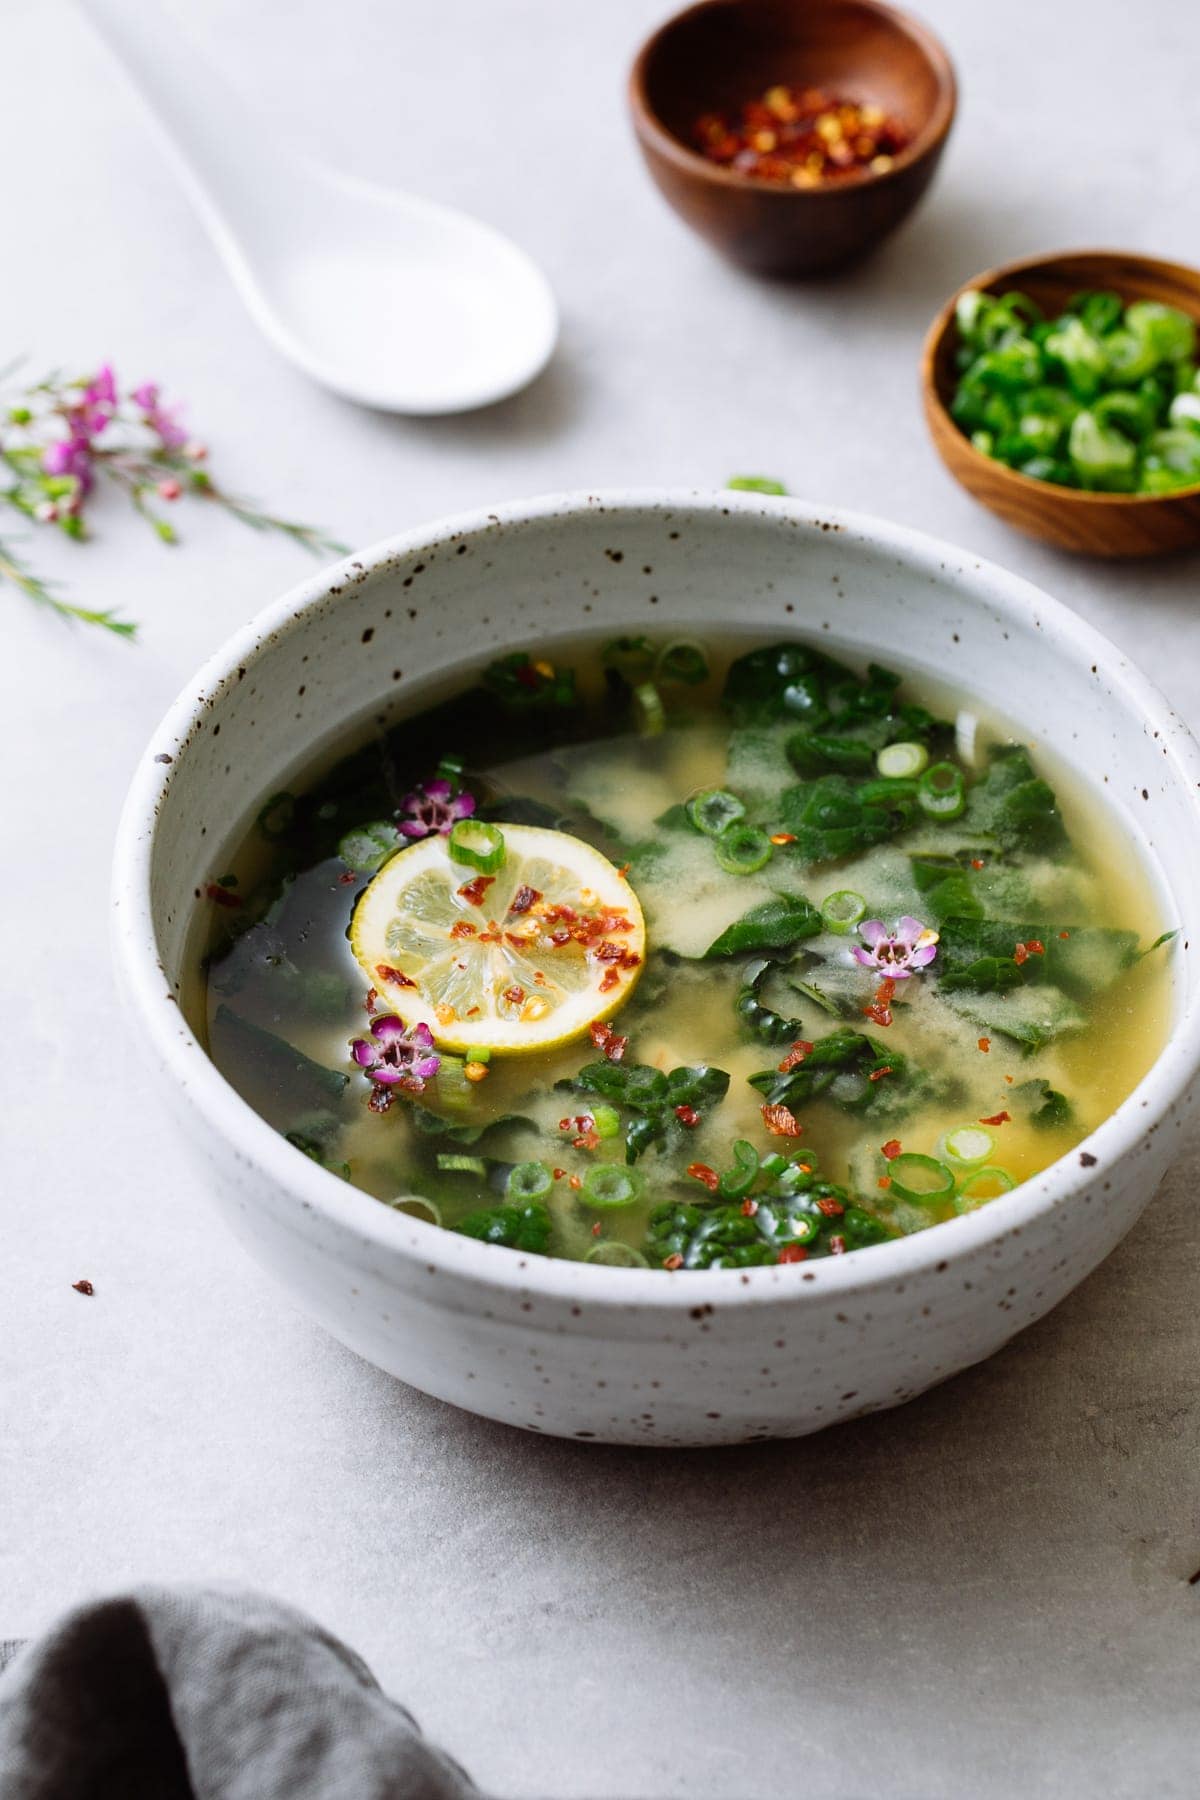 ROASTED GARLIC MISO SOUP WITH GREENS